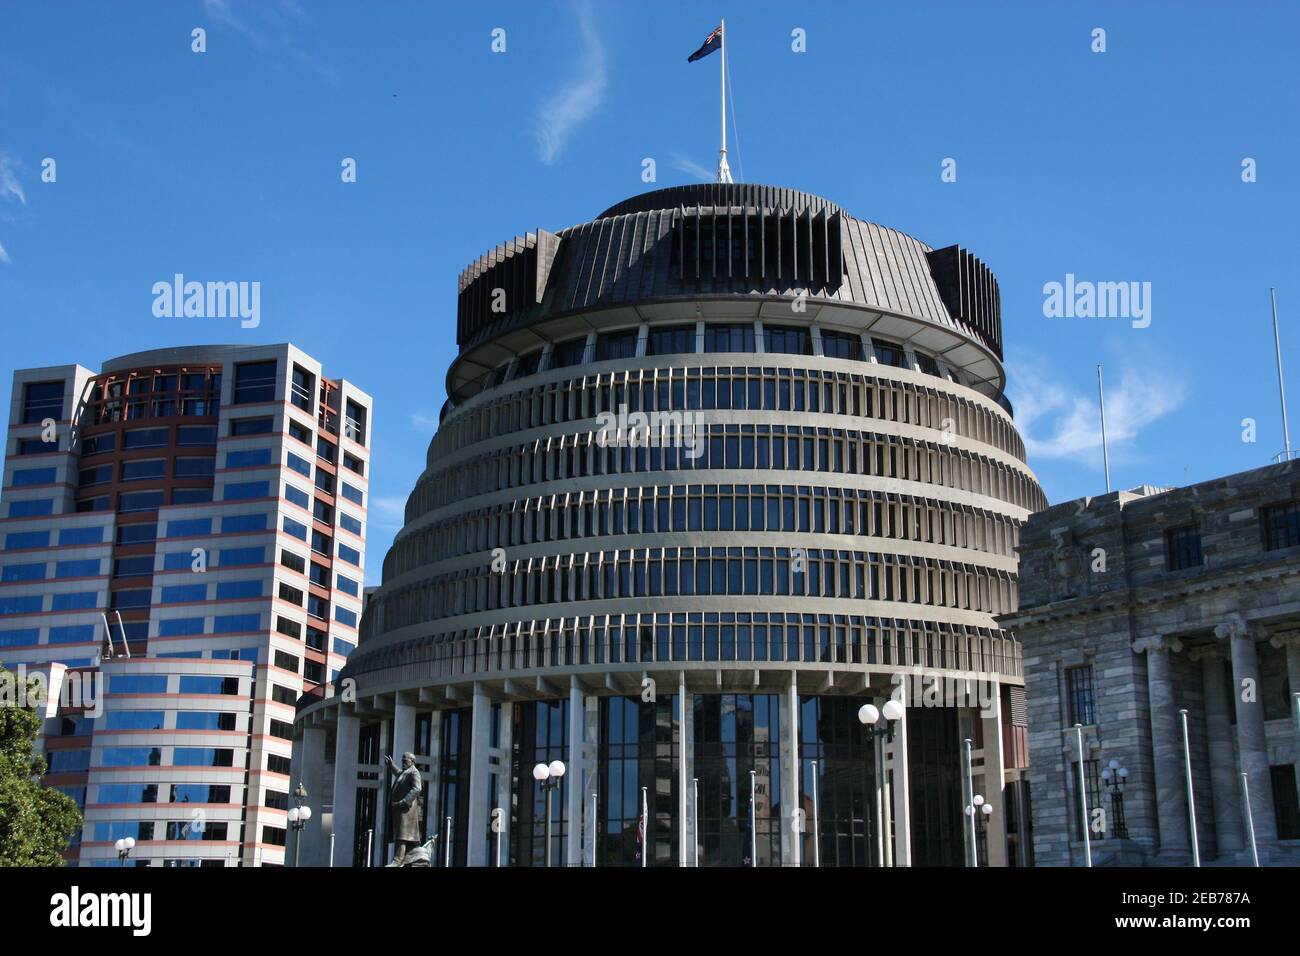 WELLINGTON, NEW ZEALAND - MARCH 7, 2009: Exterior view of New Zealand Parliament building in Wellington. The structure is informally known as the Beeh Stock Photo